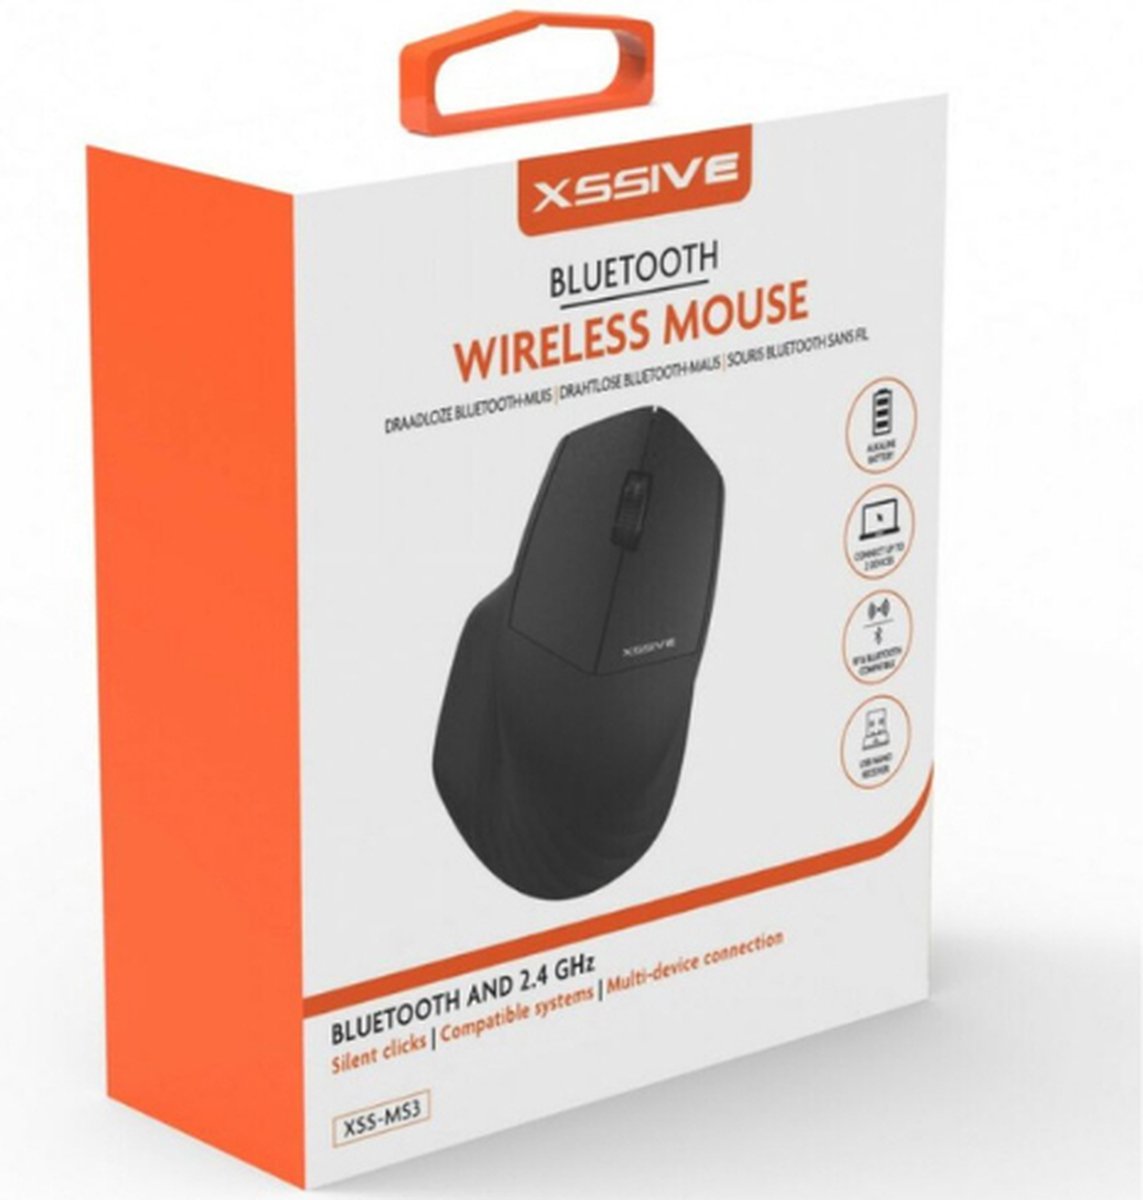 BLUETOOTH WIRELESS MOUSE - bluetooth muis 2.4 GHz - XSS-MS3